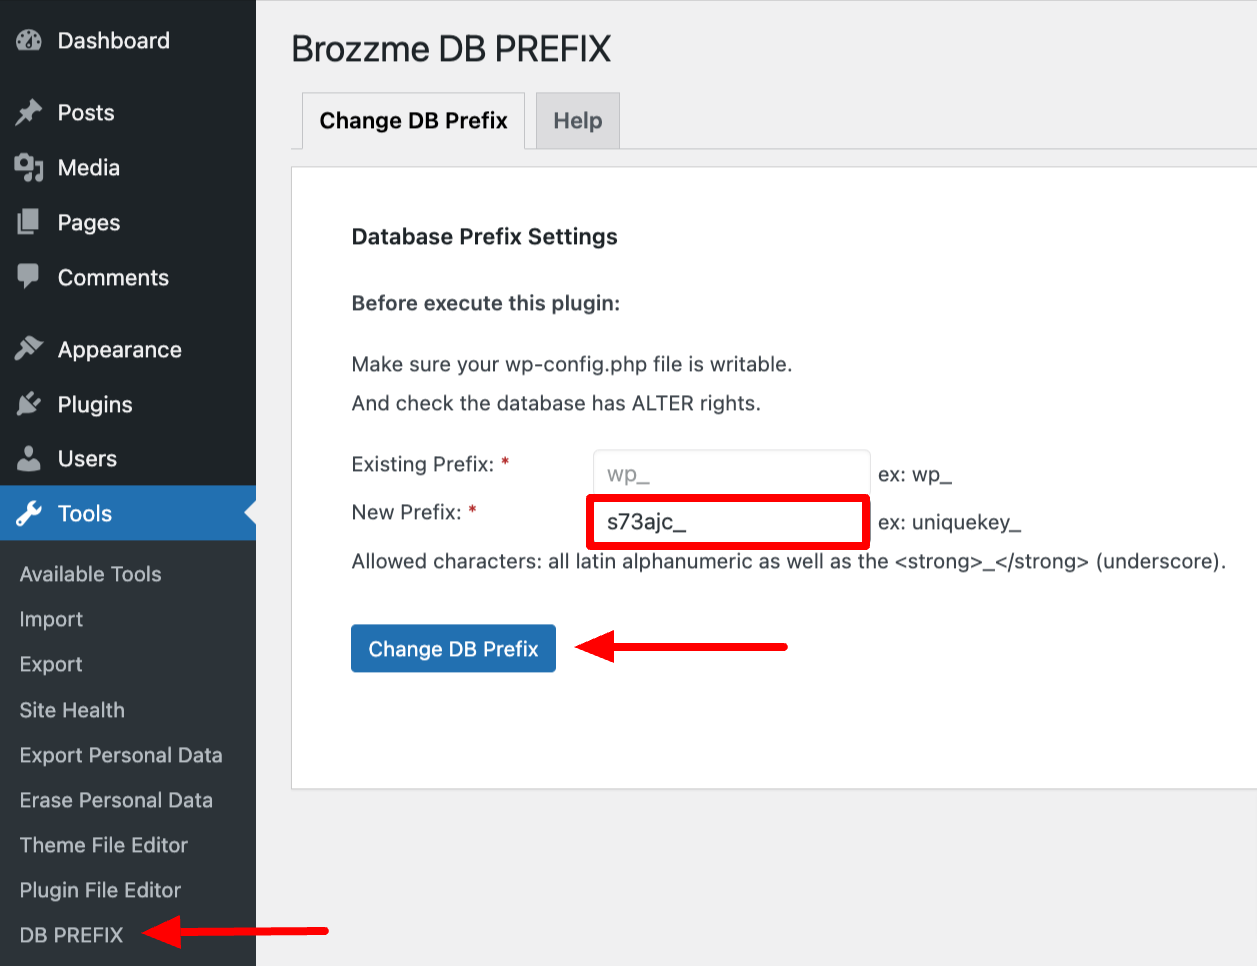 Changing the database table prefix using the Brozzme plugin.